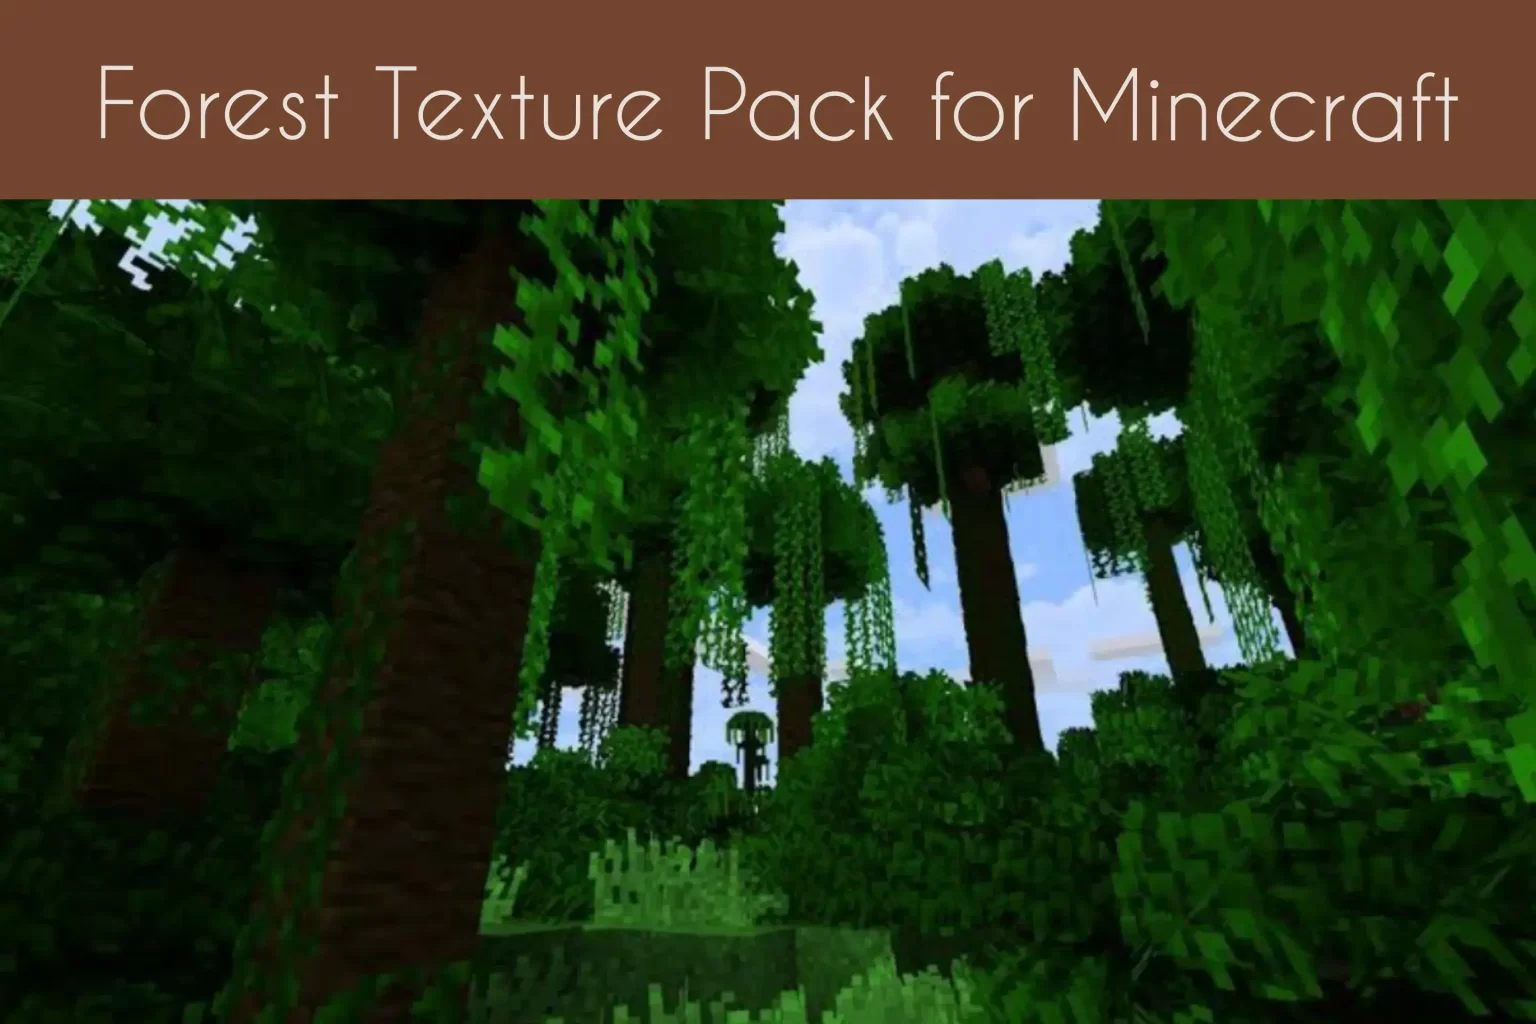 Forest Texture Pack for Minecraft
